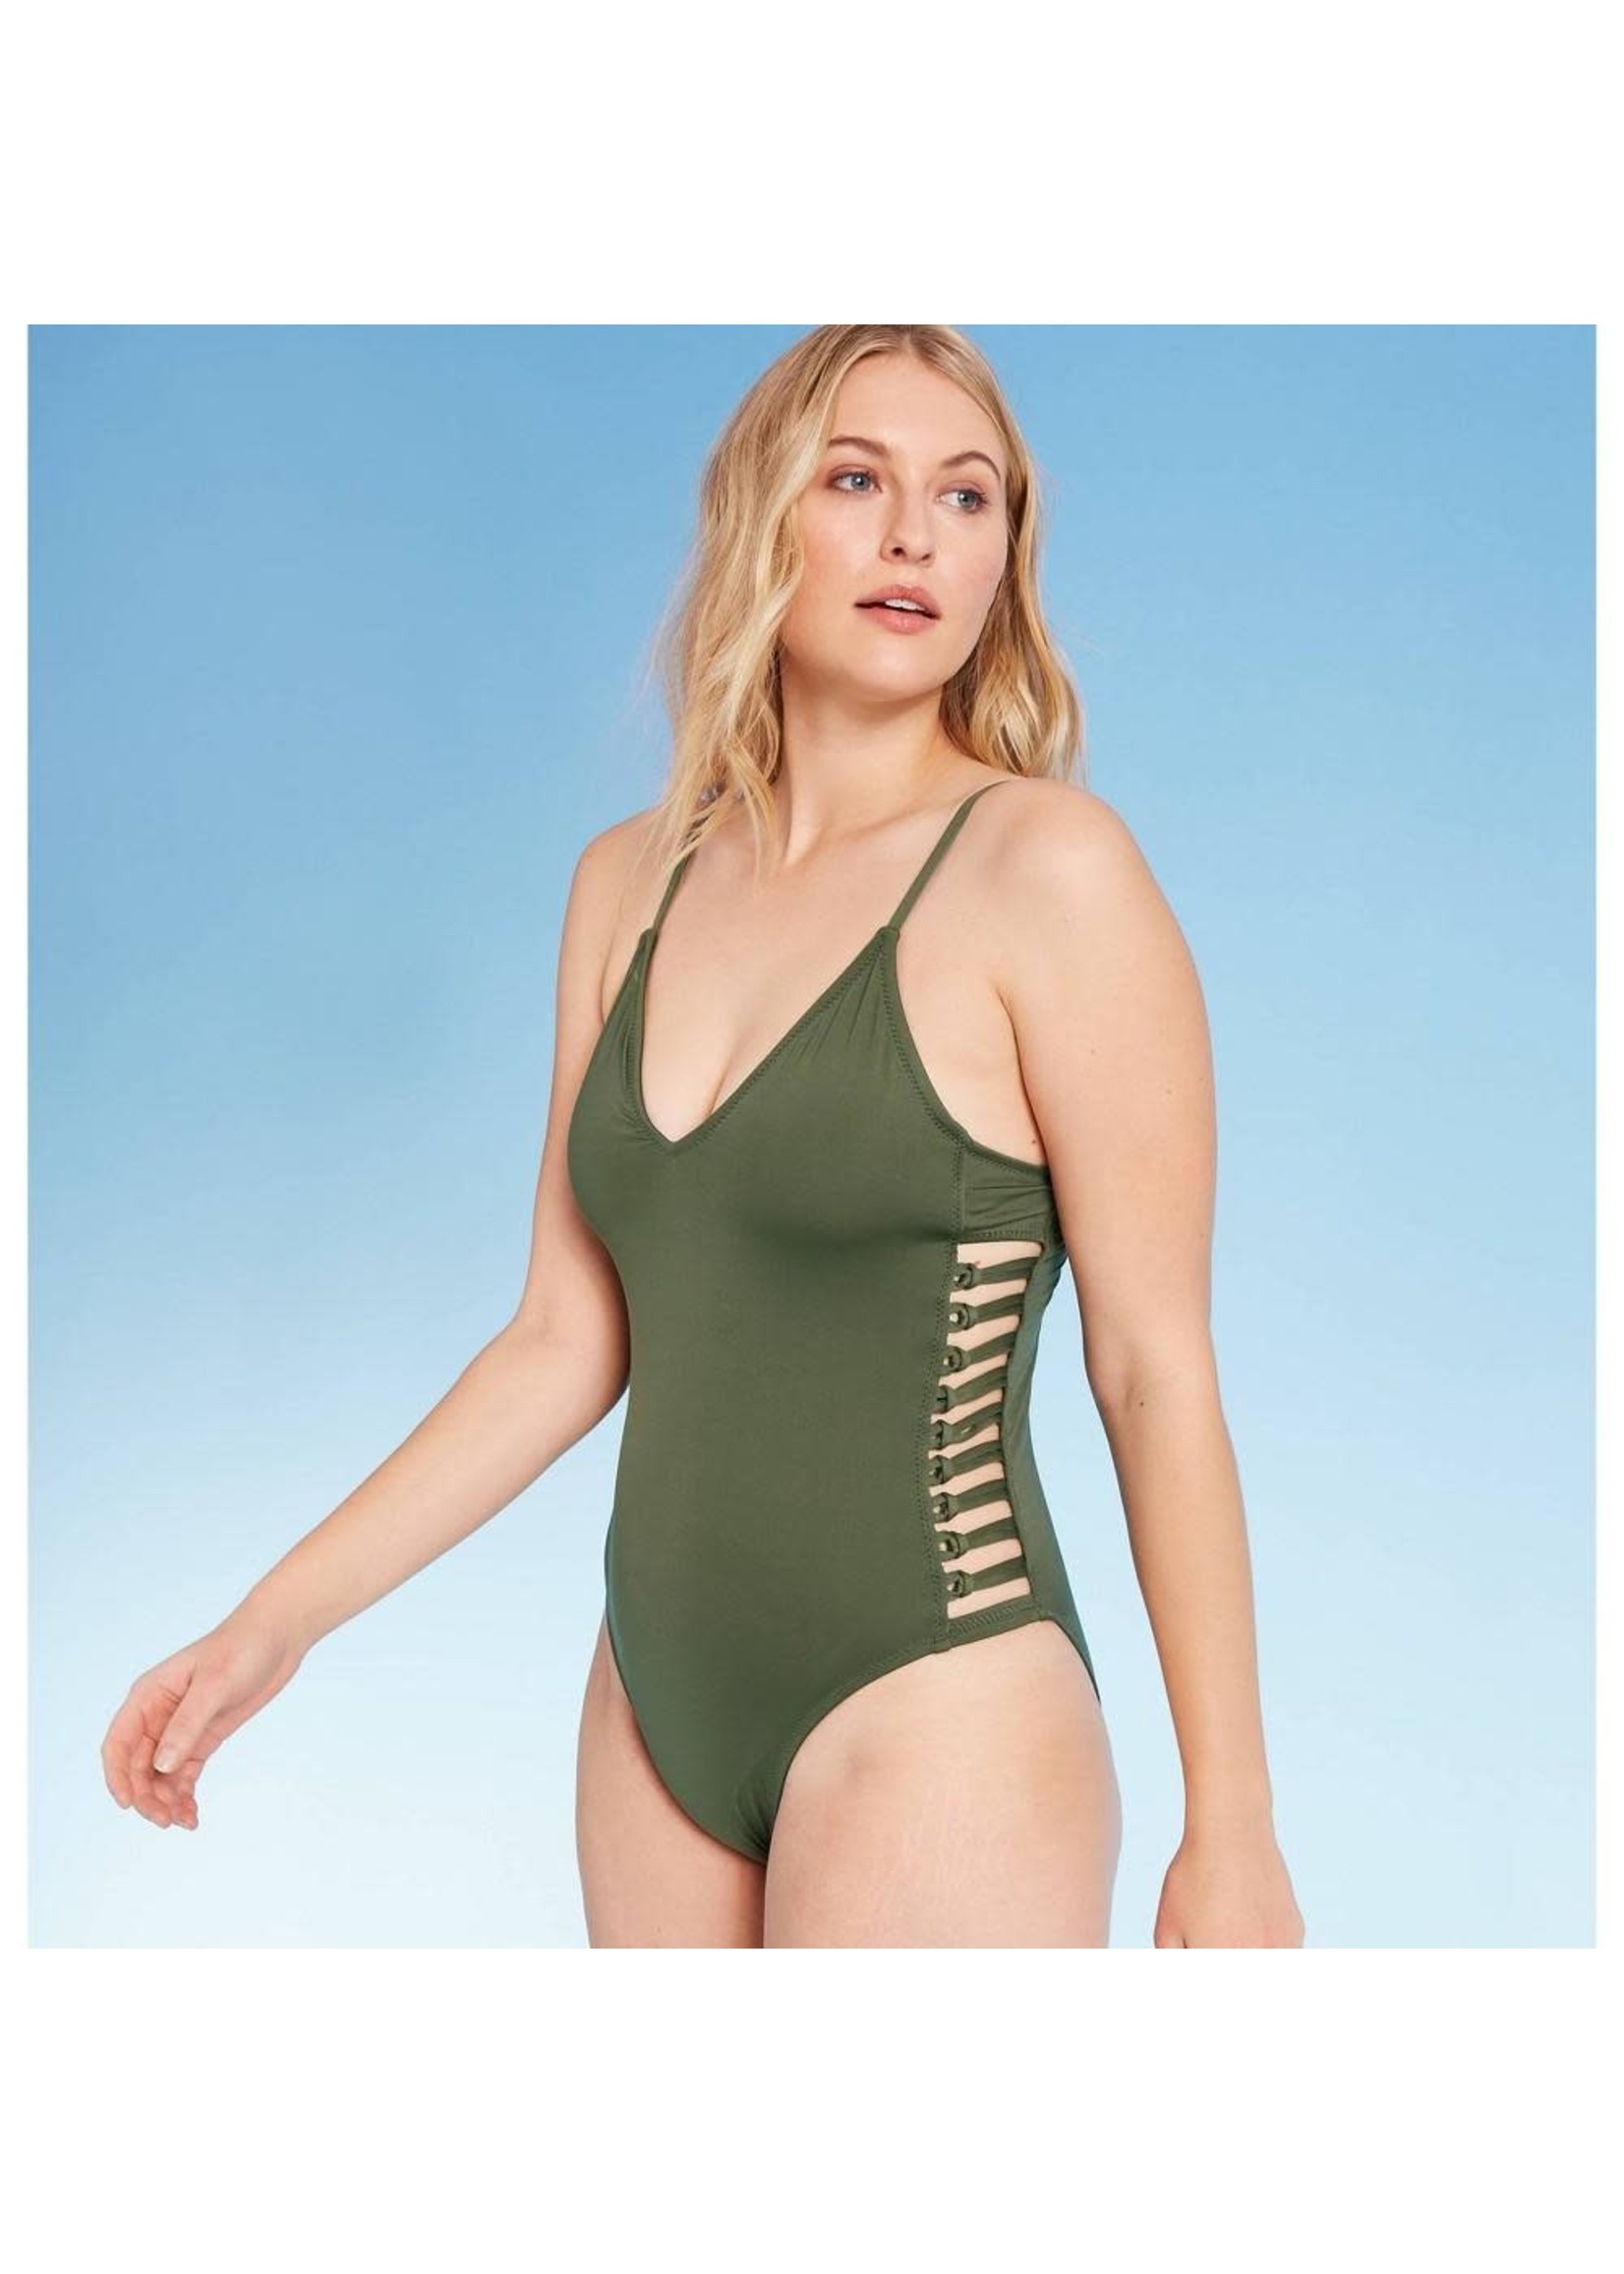 Women's Strappy Side One Piece Swimsuit - Shade & Shoreâ„¢ Palm Green L